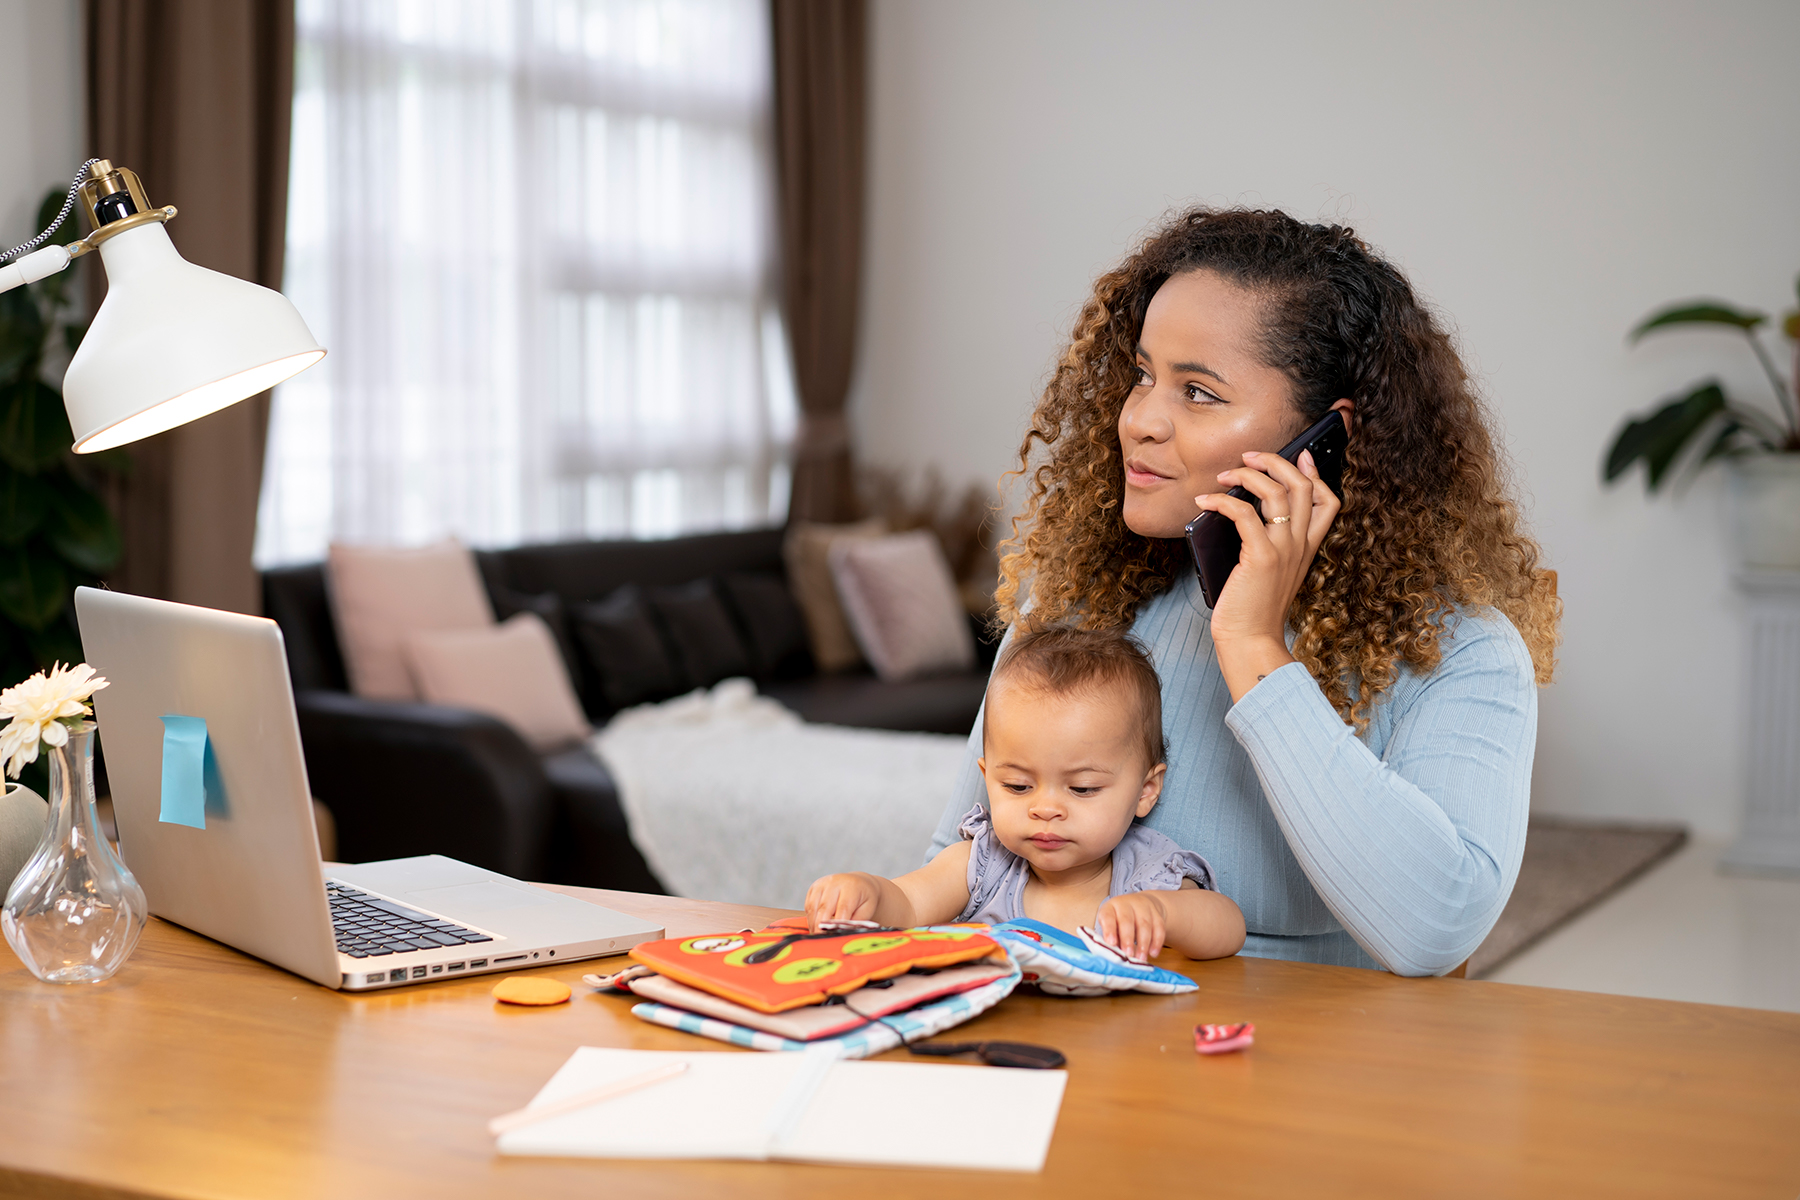 Woman working on a laptop while taking a phone call. A baby sits on her lap.